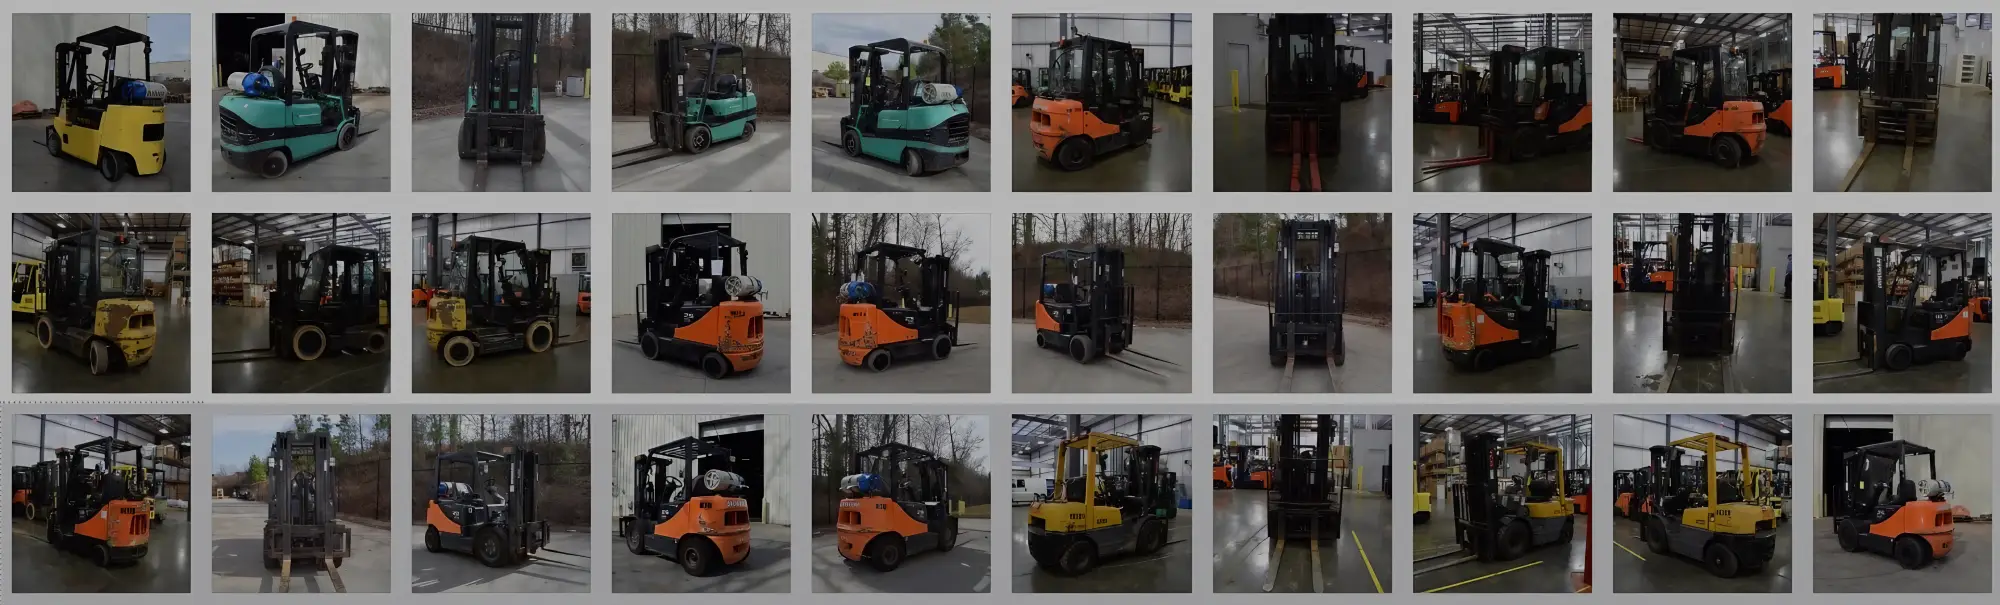 Certified Pre-Owned Used Forklifts - Financing Available